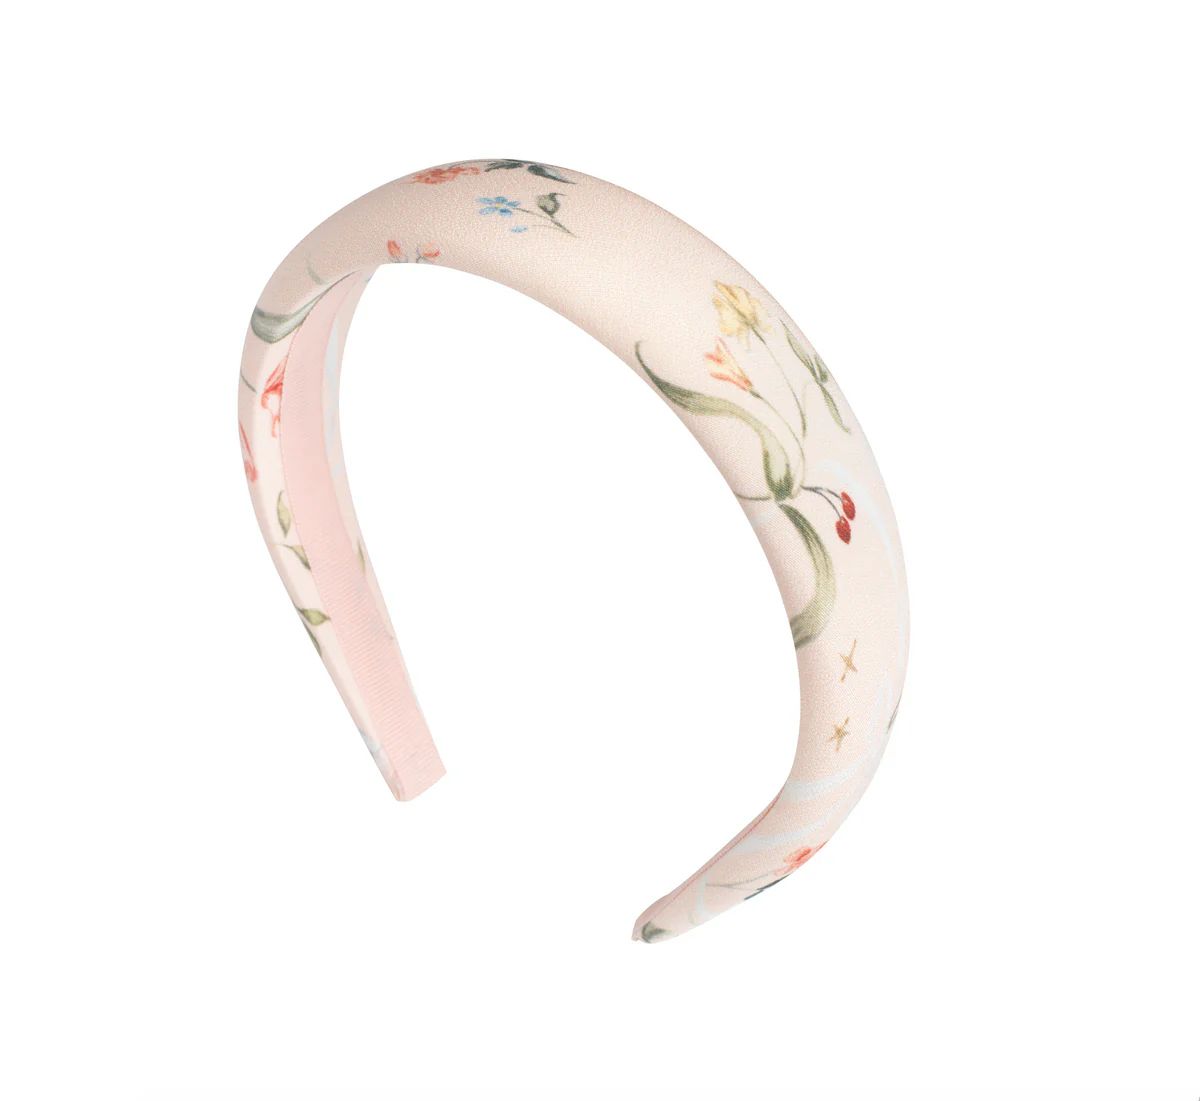 Riley Sheehey x Refine: The Headband in Pale Pink | Over The Moon